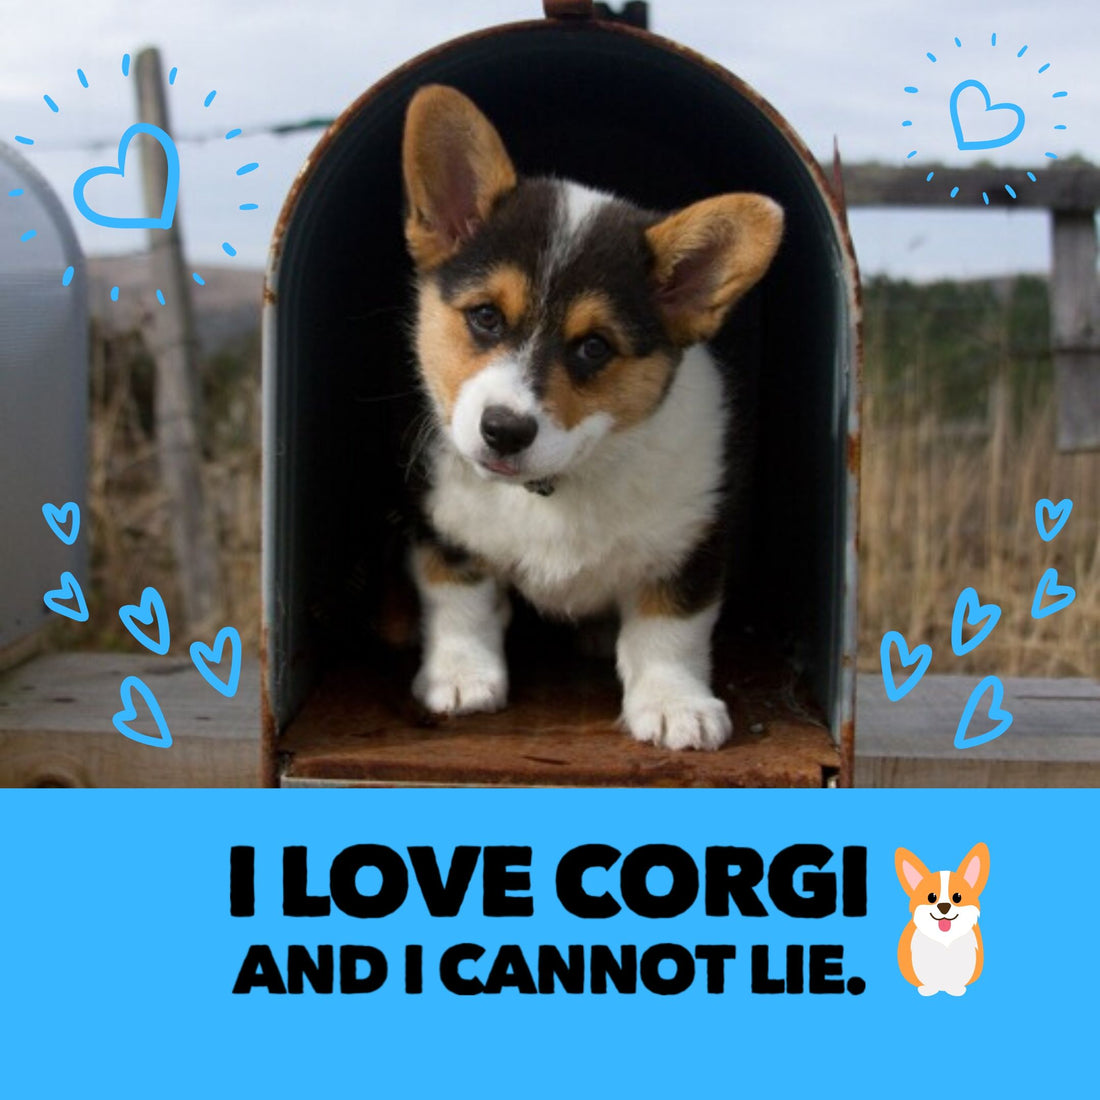 Corgis rescue, adoptions, re-home support groups, and resources.